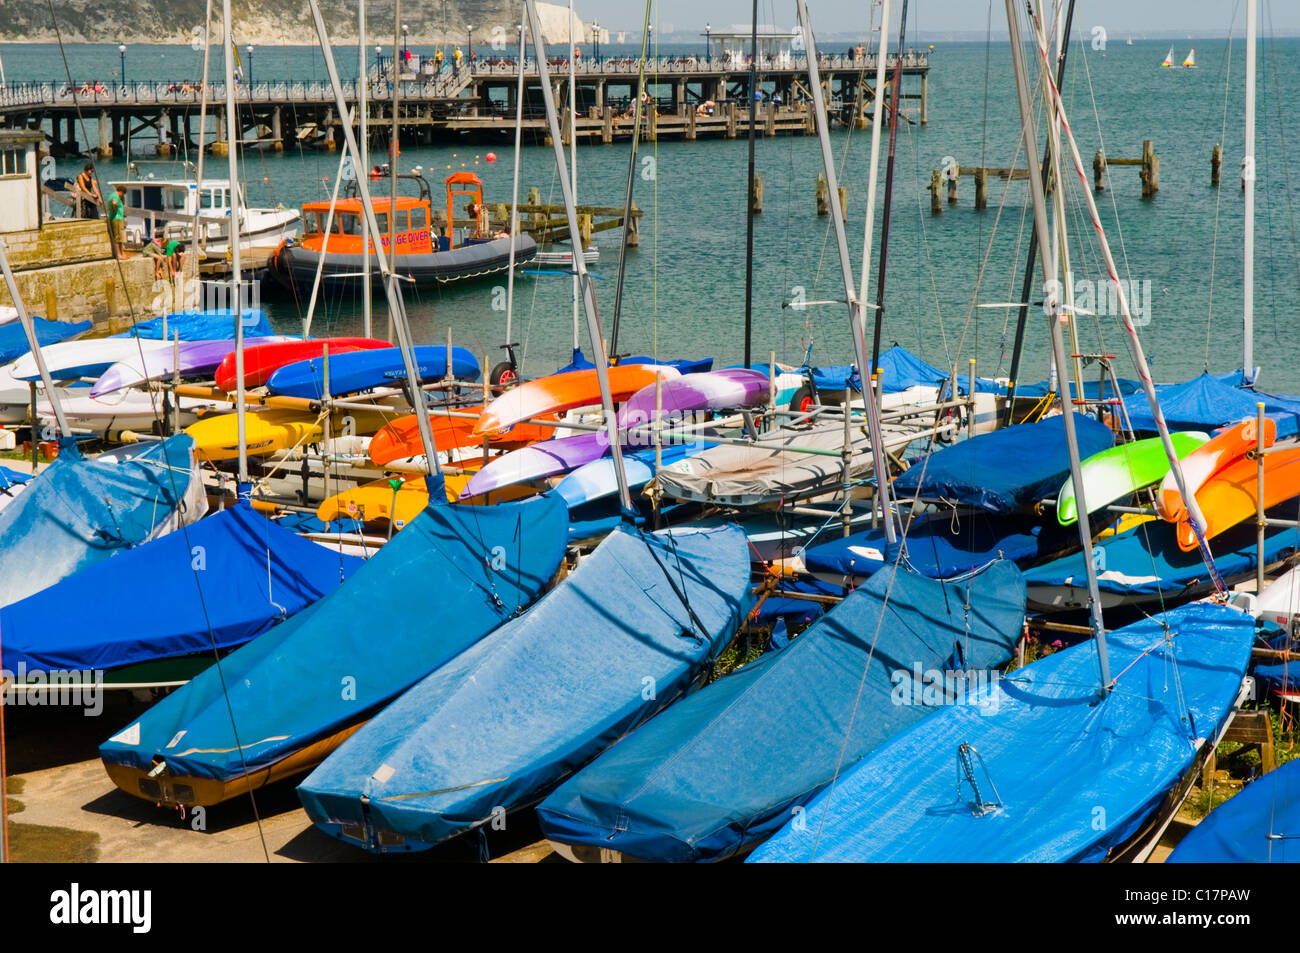 Rows of Dinghies and Kayaks at a Sailing Club Stock Photo